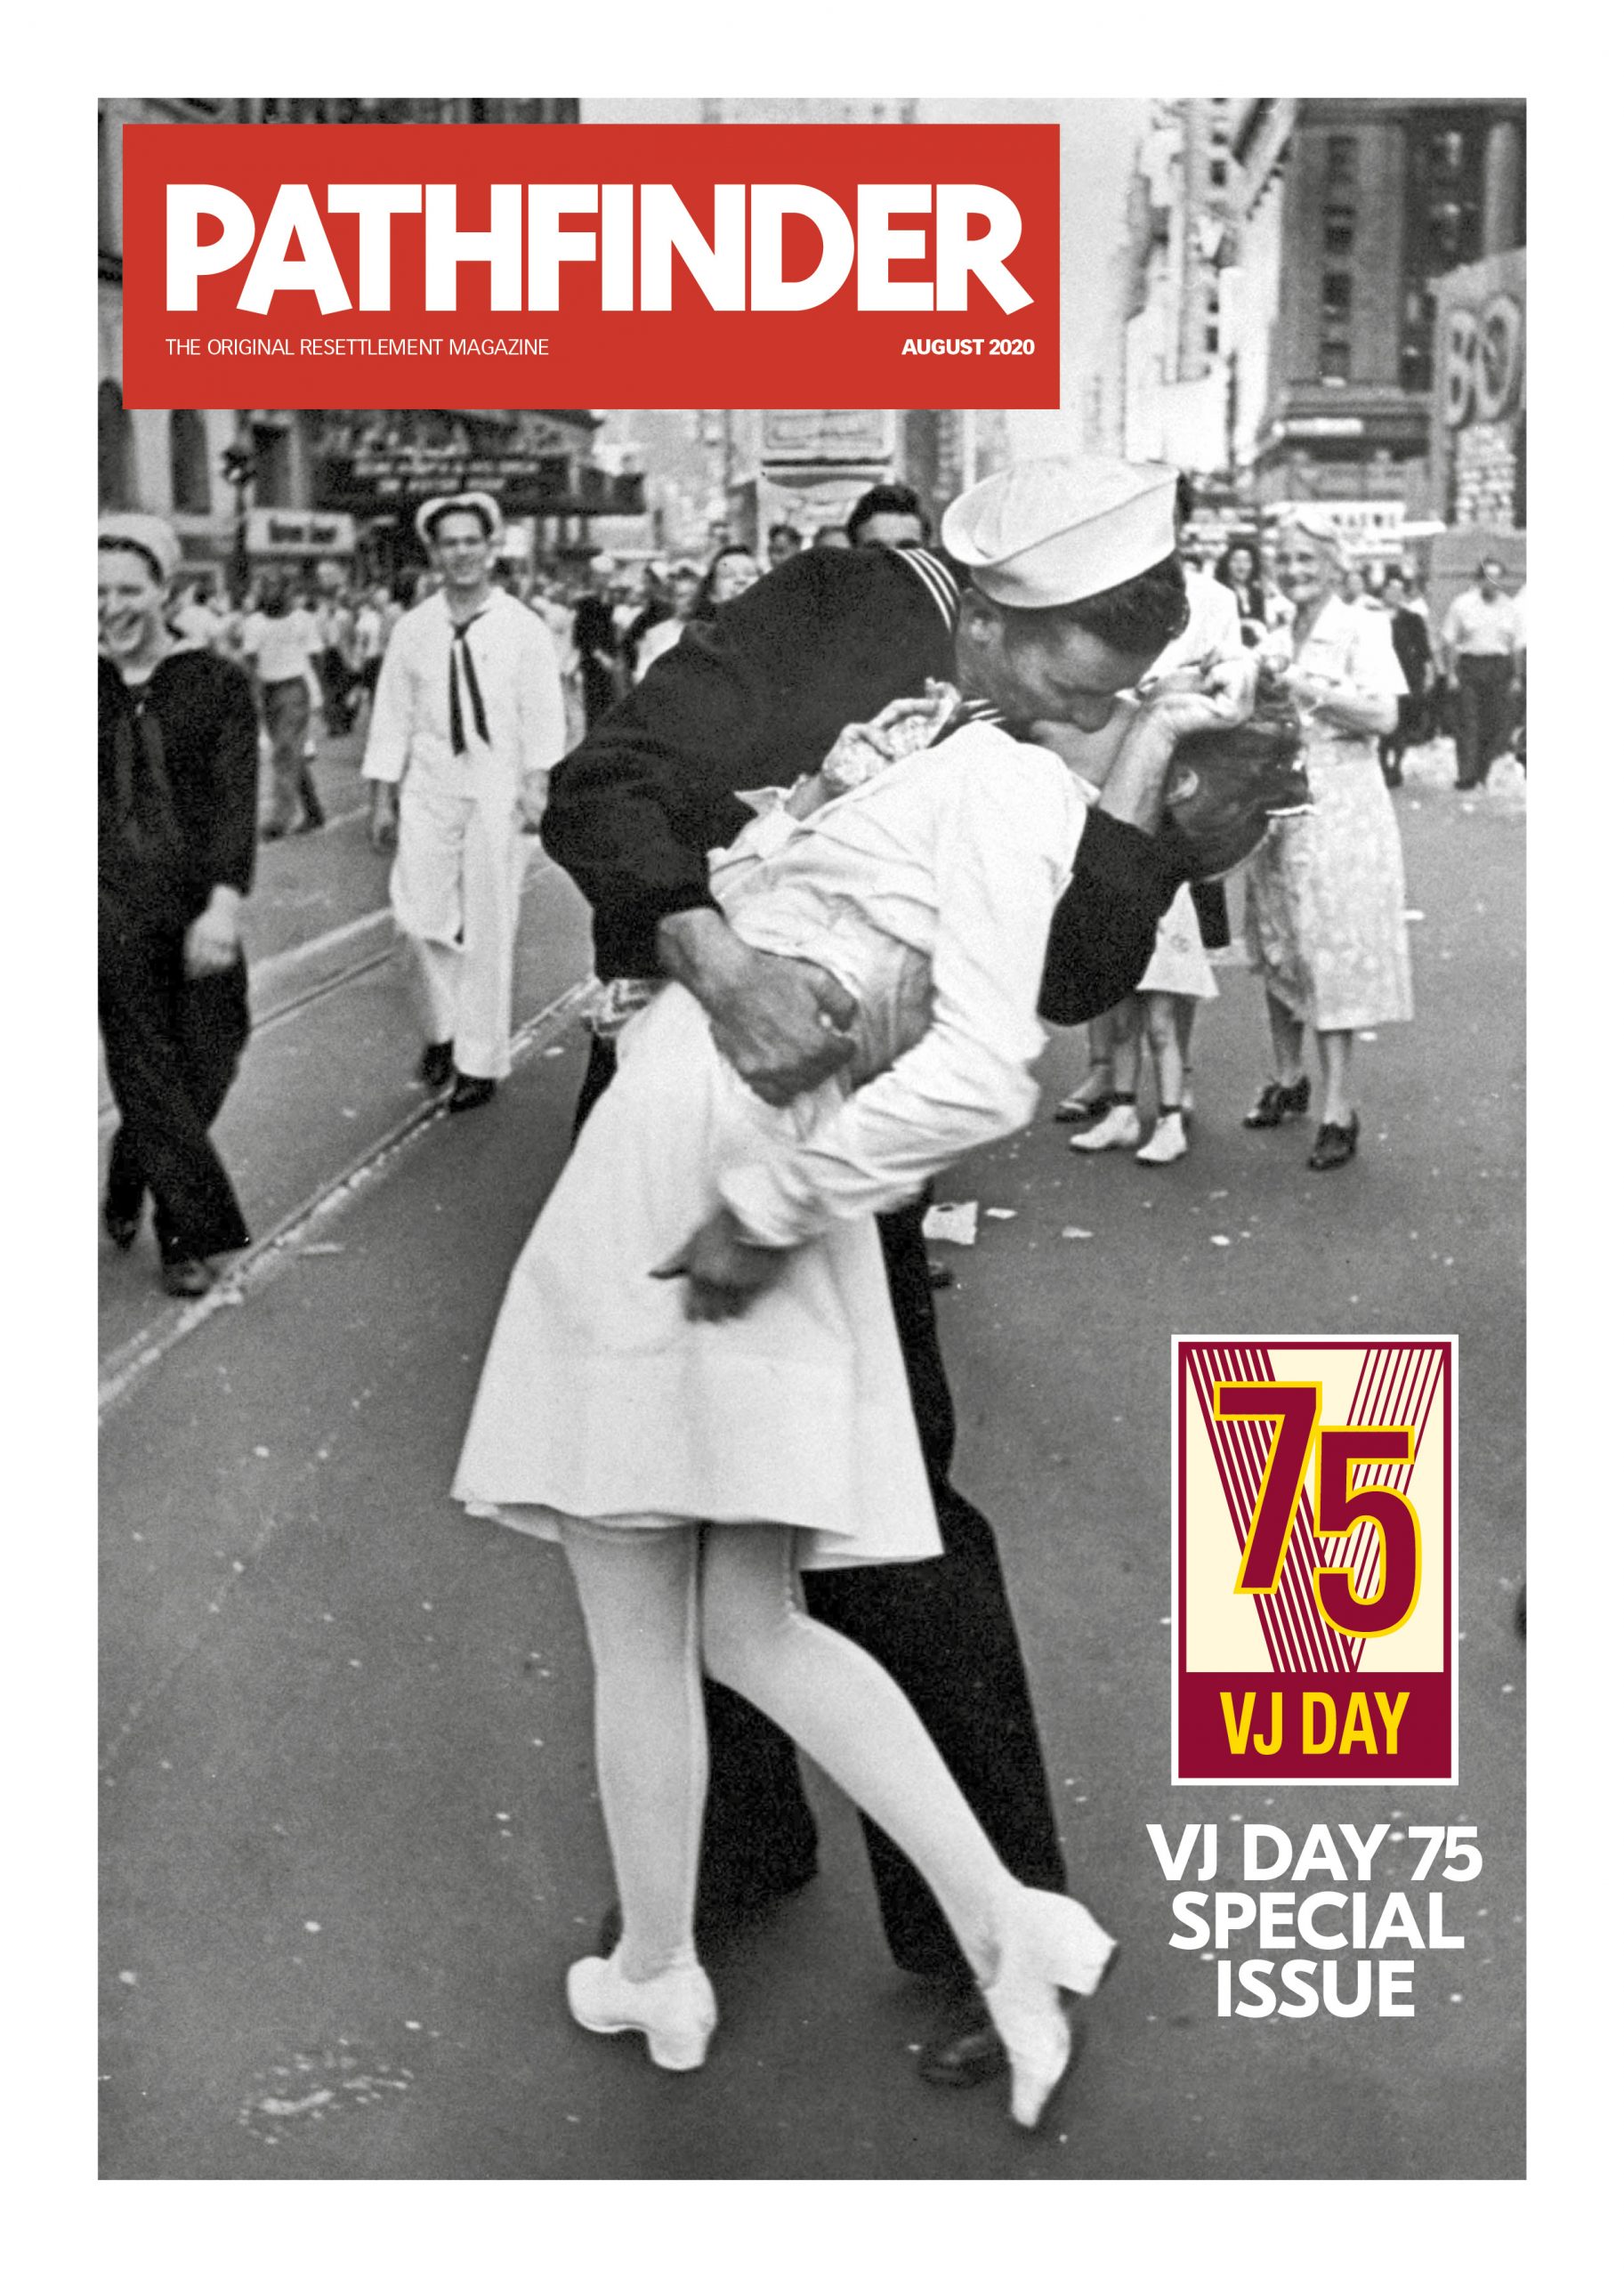 The August VJ Day 75 Special Issue Of Pathfinder Is Out Now!